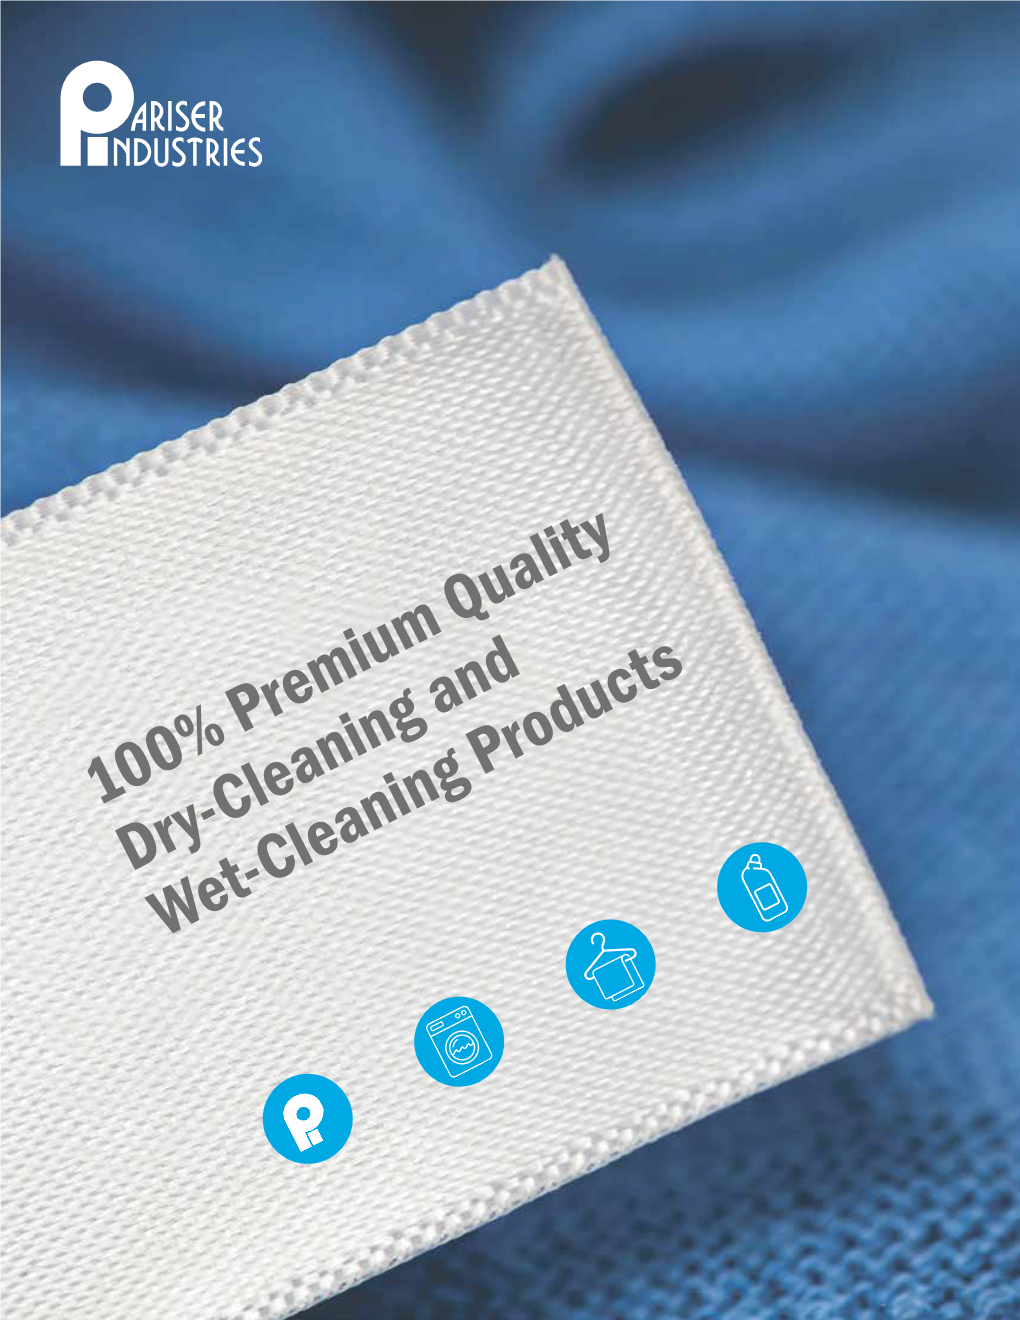 100% Premium Quality Dry-Cleaning and Wet-Cleaning Products